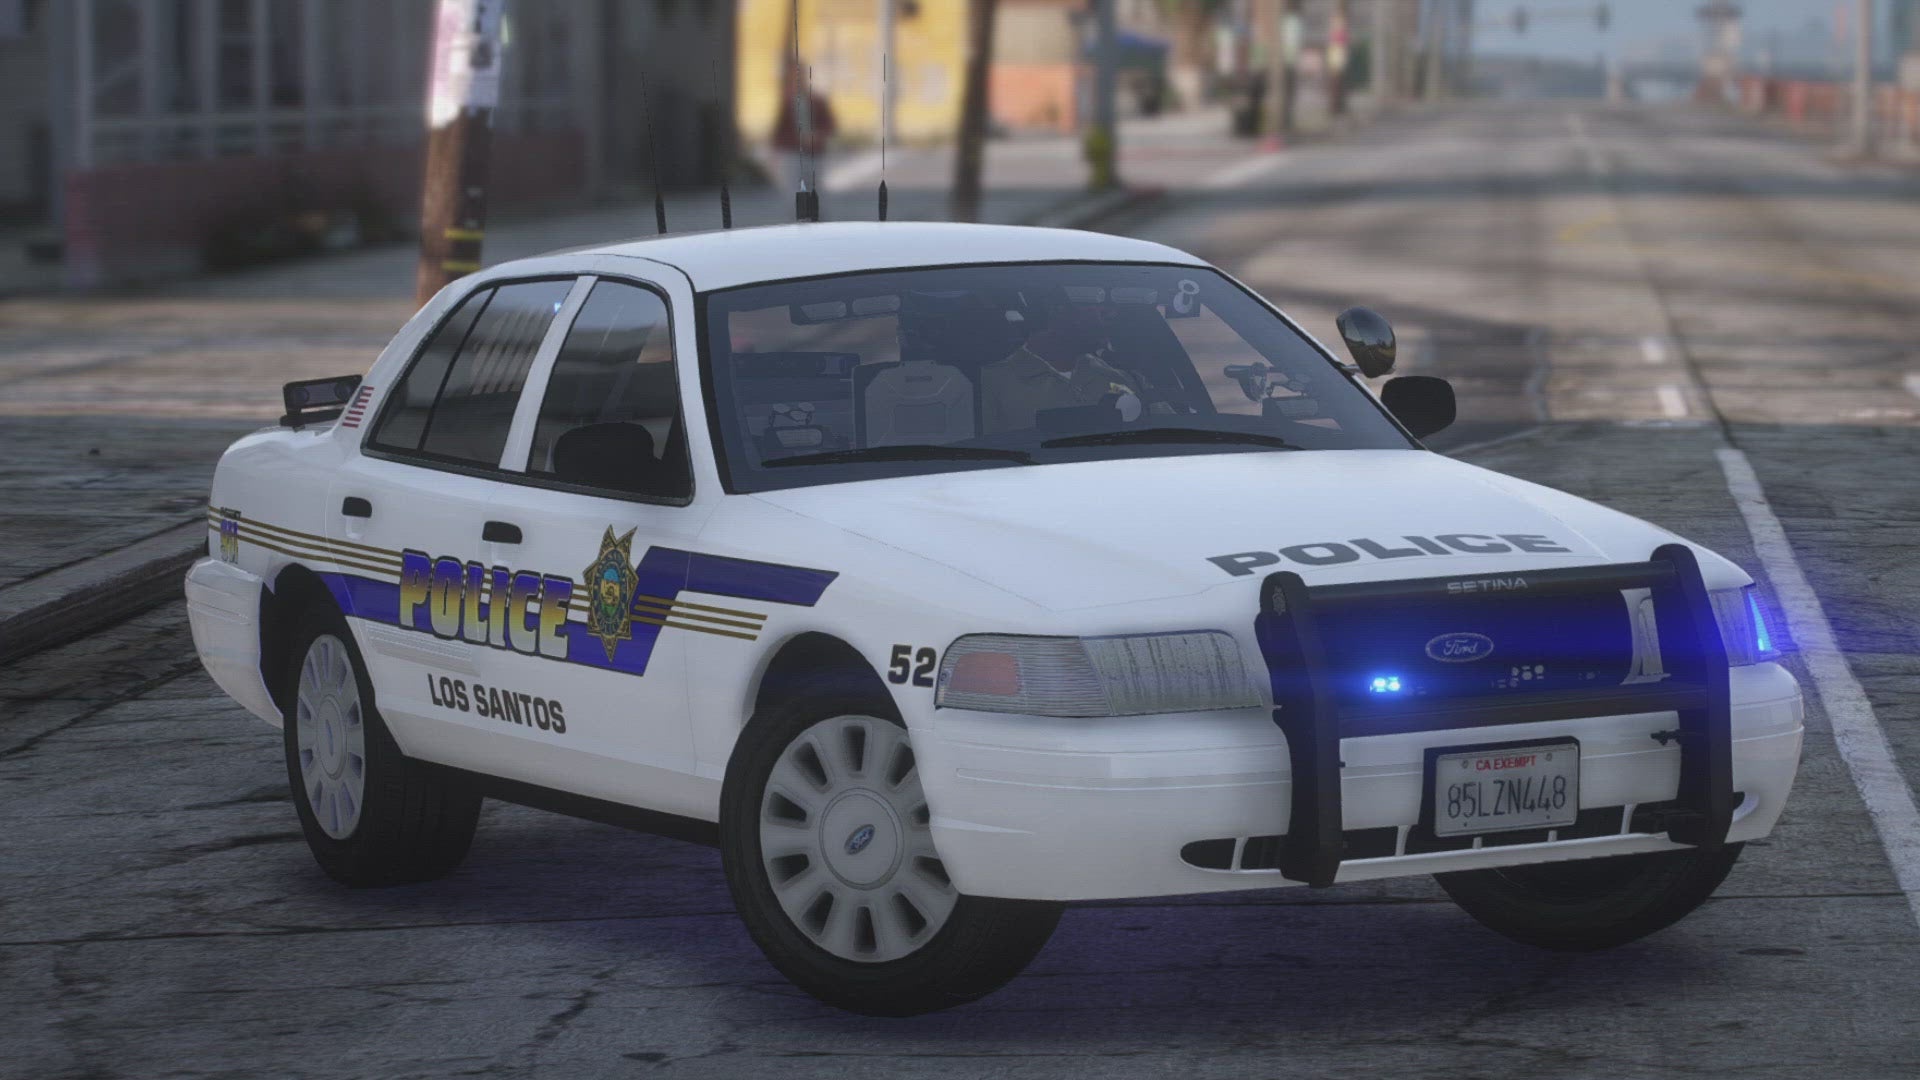 A retro police car with a Whelen Patriot lightbar, featuring NON-ELS technology and created by Othrin for FiveM